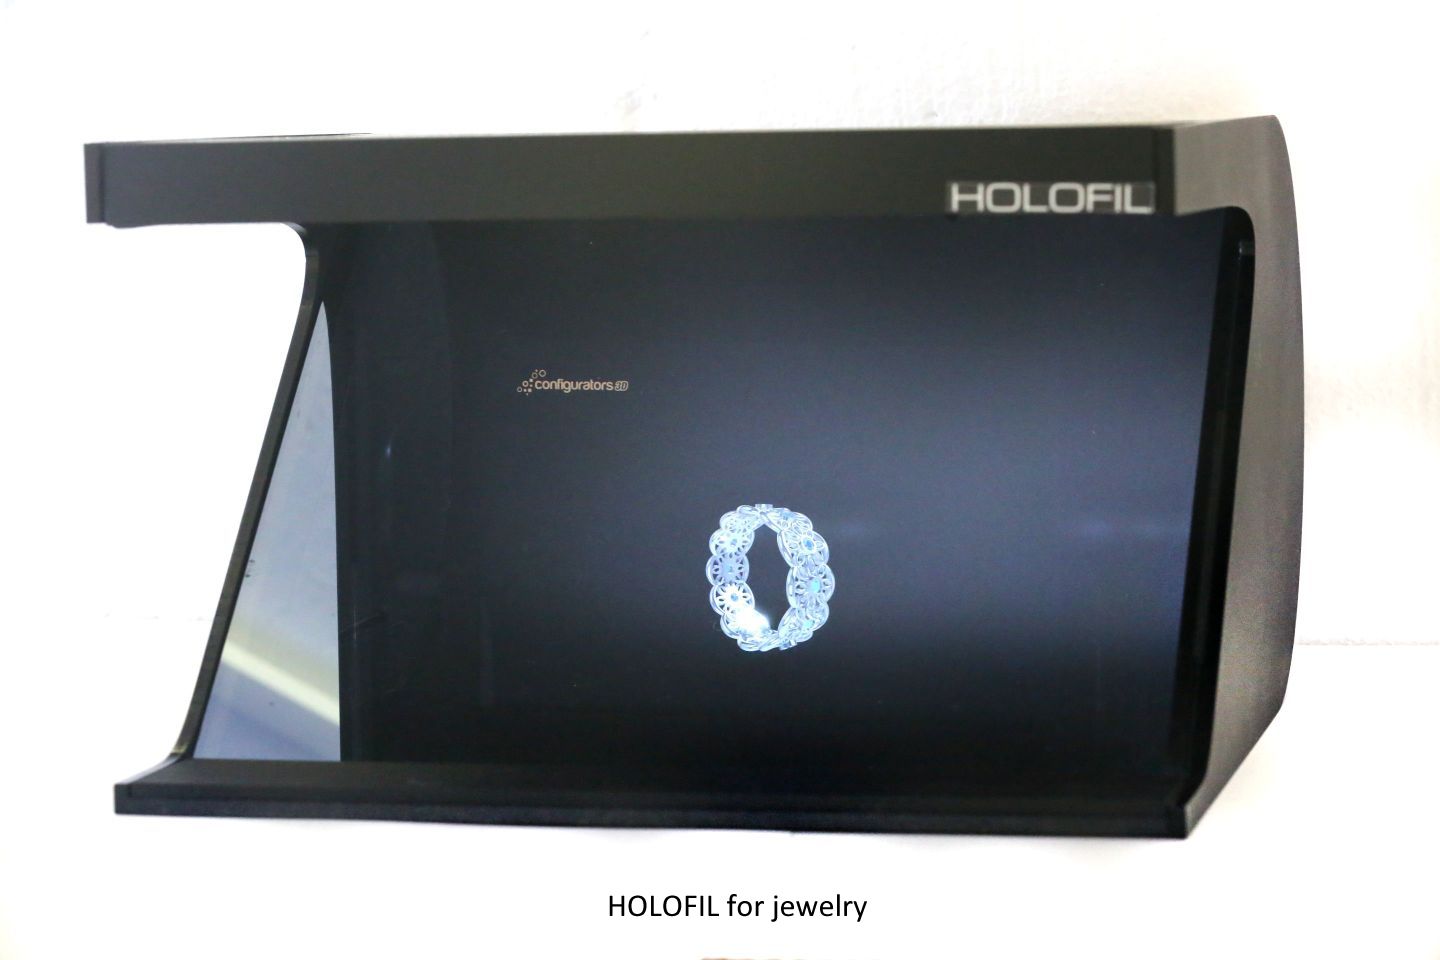 HOLOFIL for jewelry